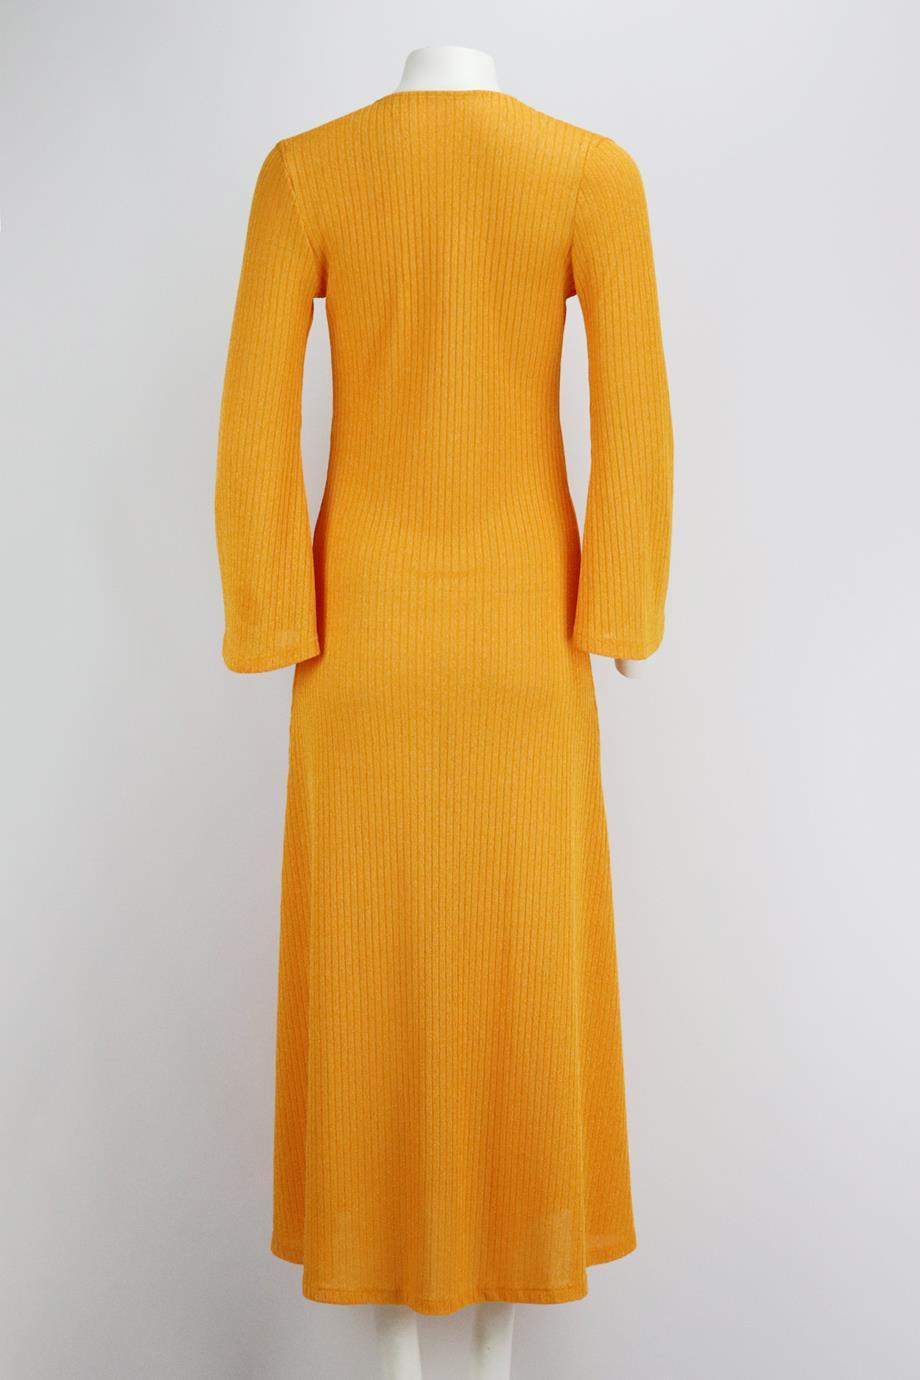 dodo bar or yellow cut out dress